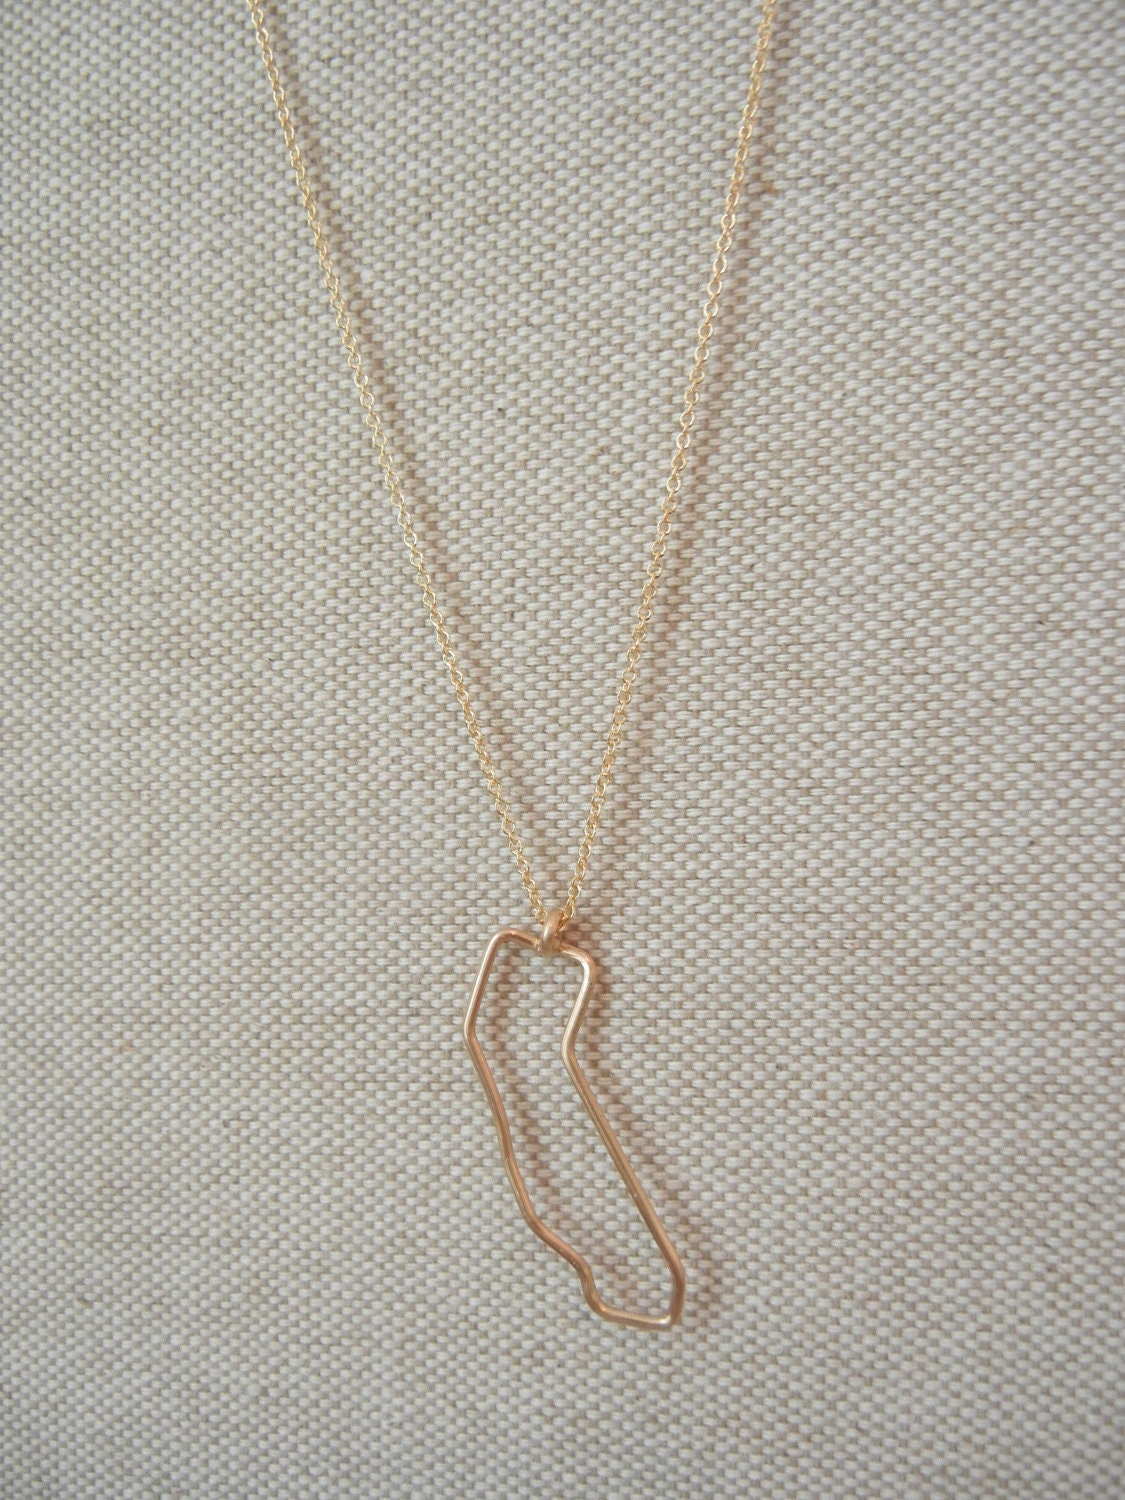 Gold Filled California Necklace